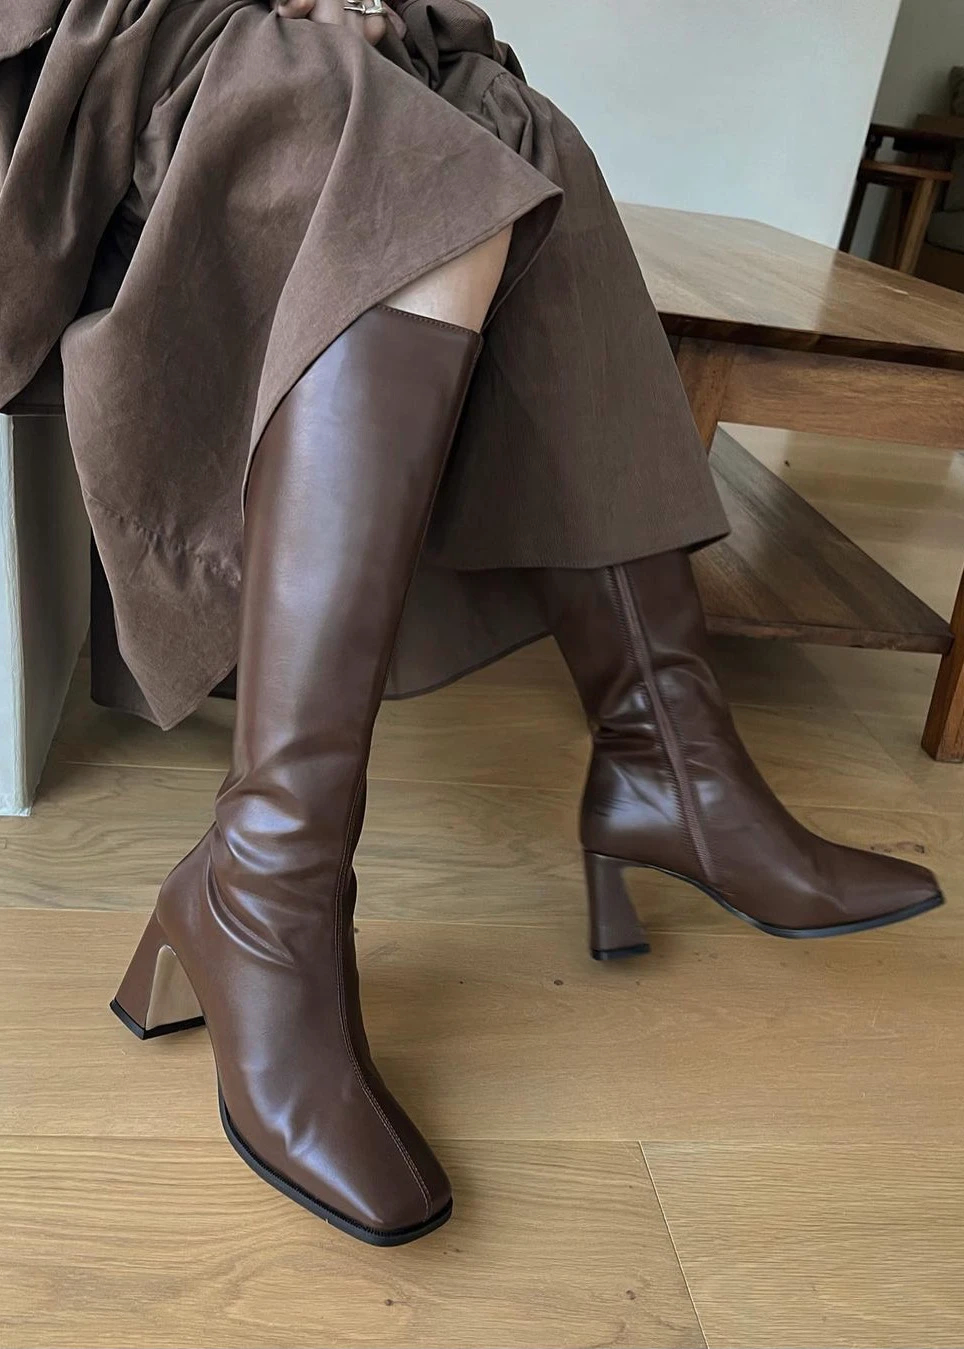 trapezoid heel basic long boots / willfully（ウィルフリー）のshoes ...